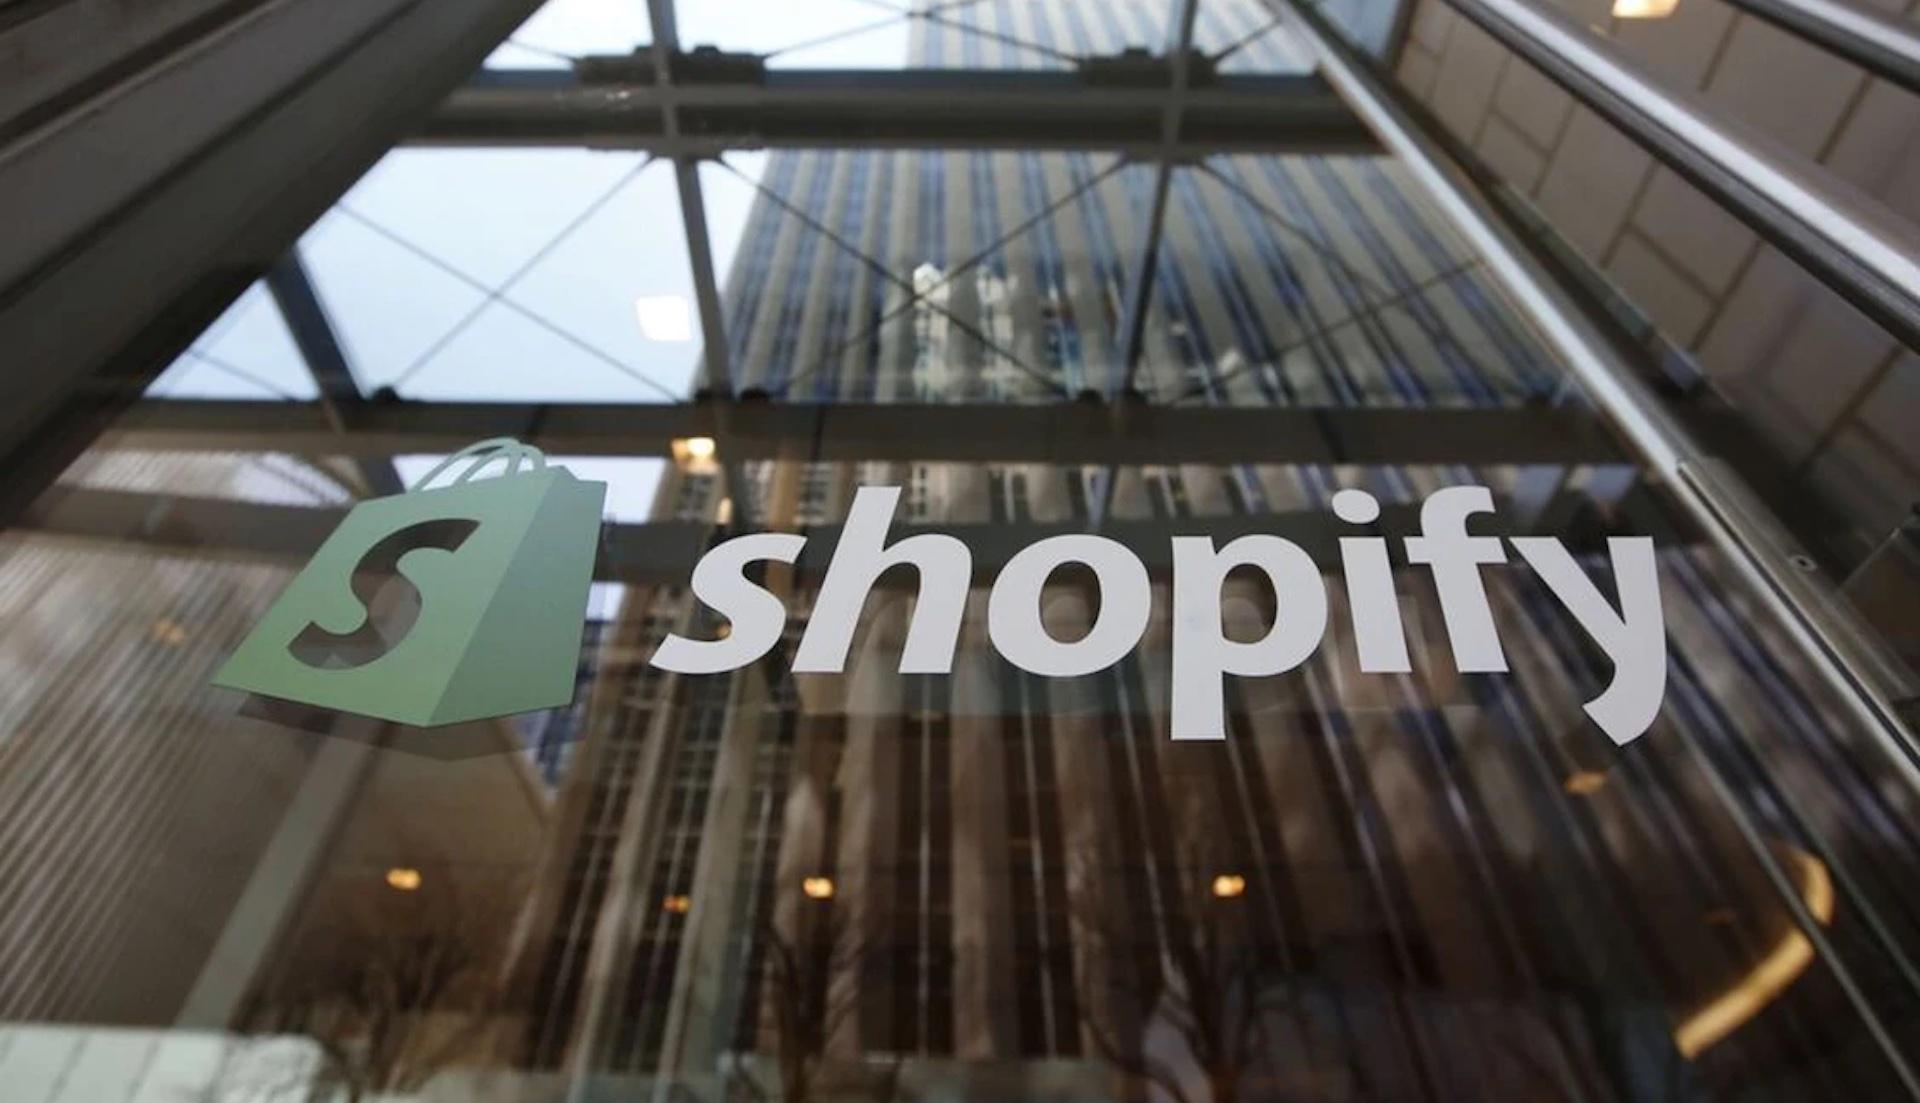 Shopify Reportedly in Talks to Acquire Tech Startup Deliverr